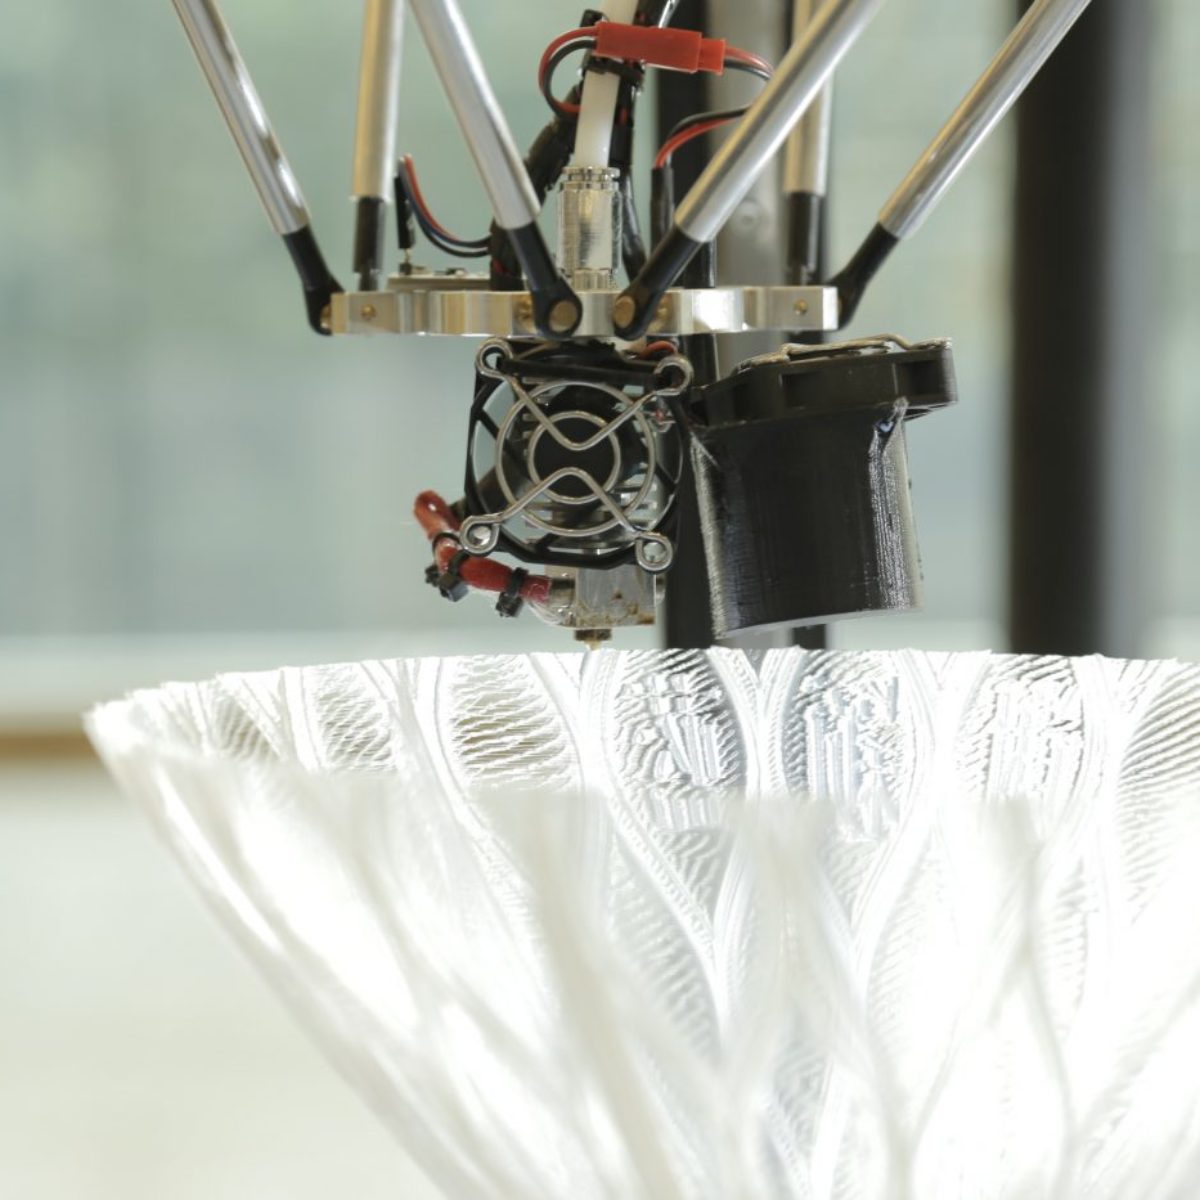 Close-Up on the Delta Tower 3D Printer and the component being printed with Chinese Characters